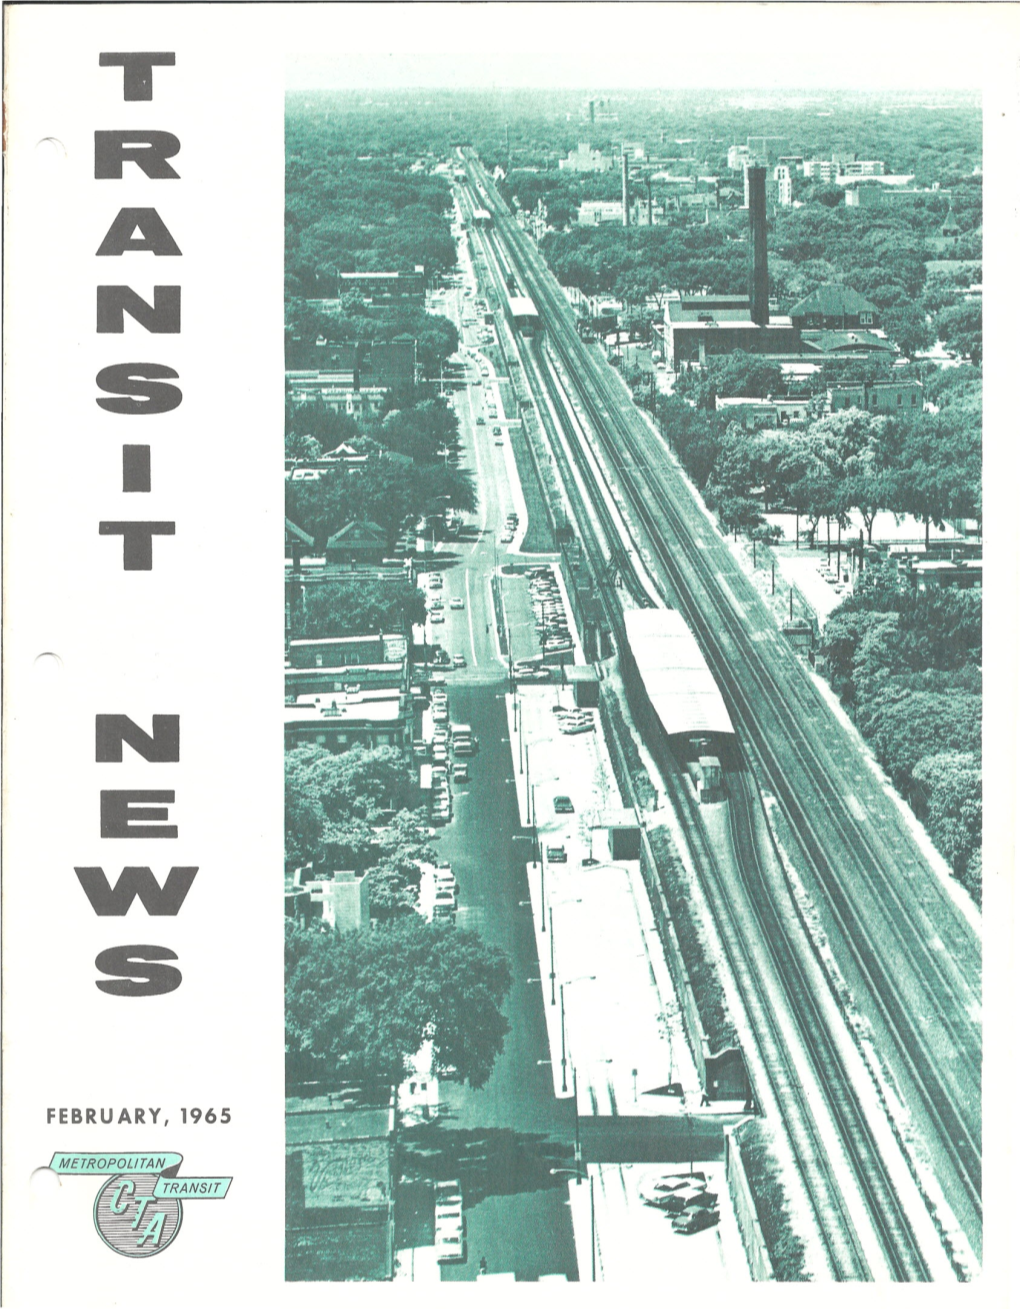 Chicago Transit Authority, Under the Supervision of the Director of Subject of "Communities We Serve" in This Issue, Is the Lake Public Informotion